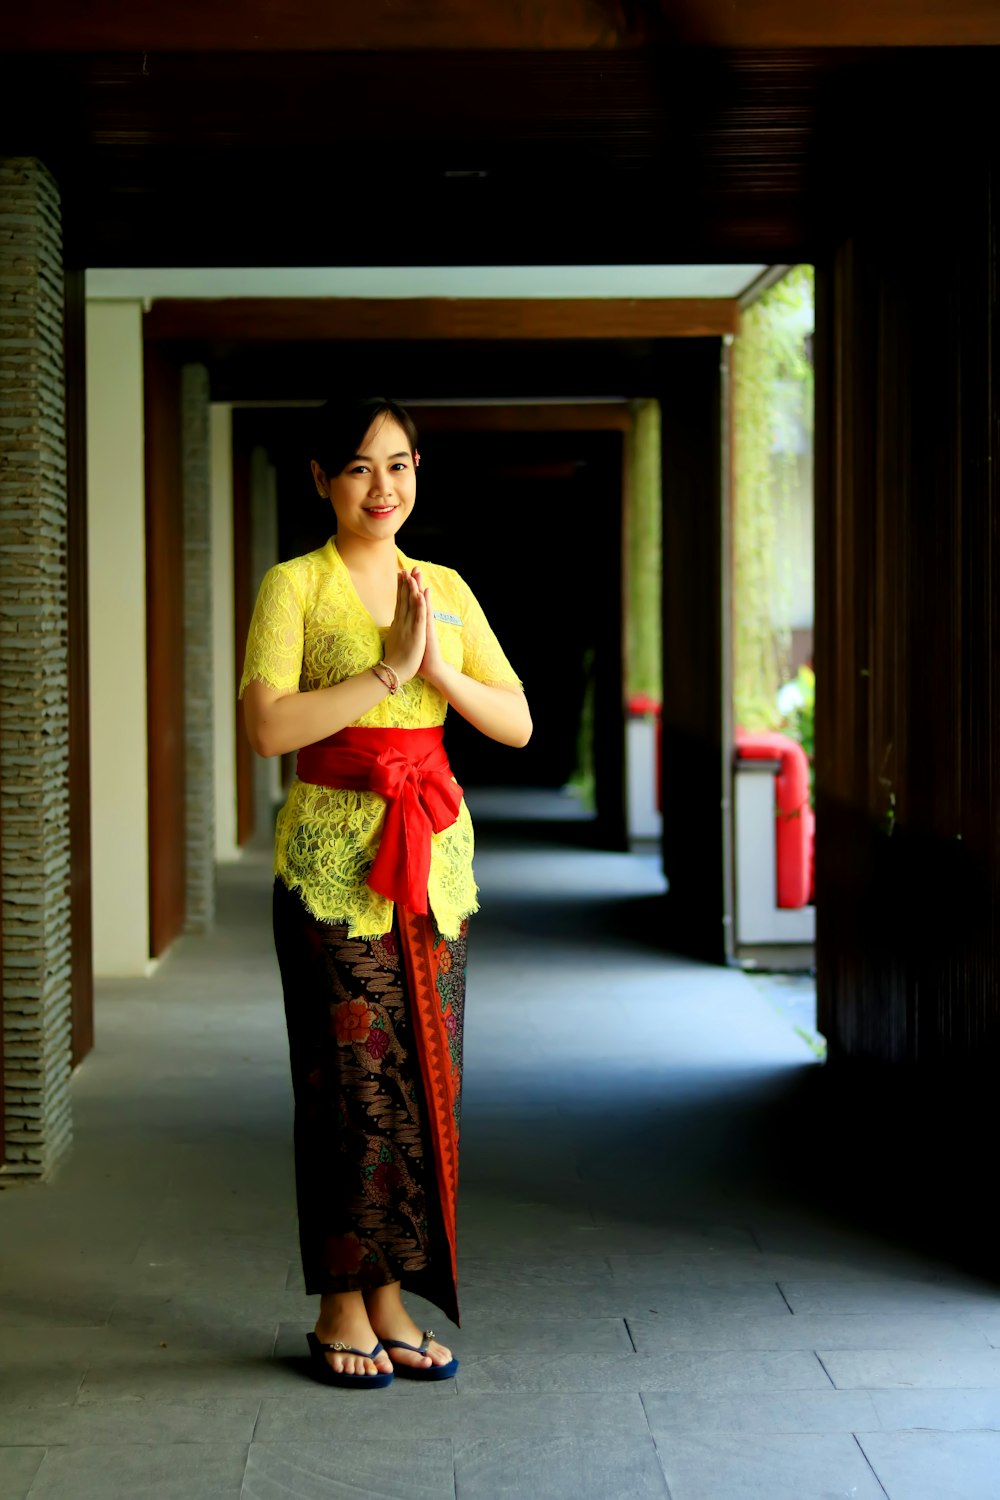 woman in yellow and red sari dress